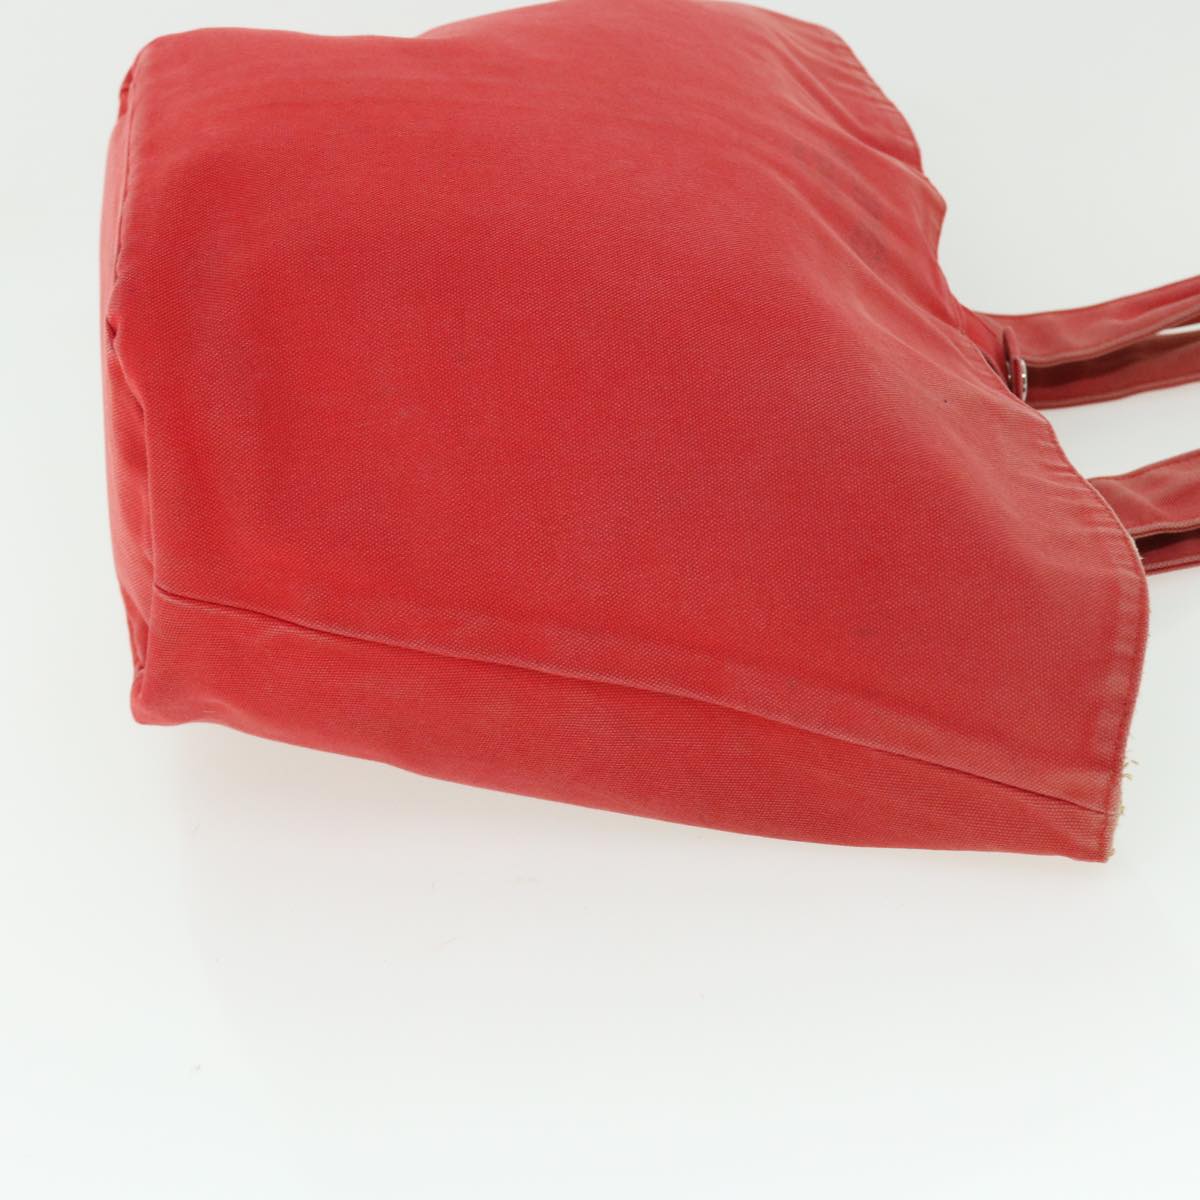 HERMES Panniedo Plage Tote Bag Canvas Red Auth bs7474